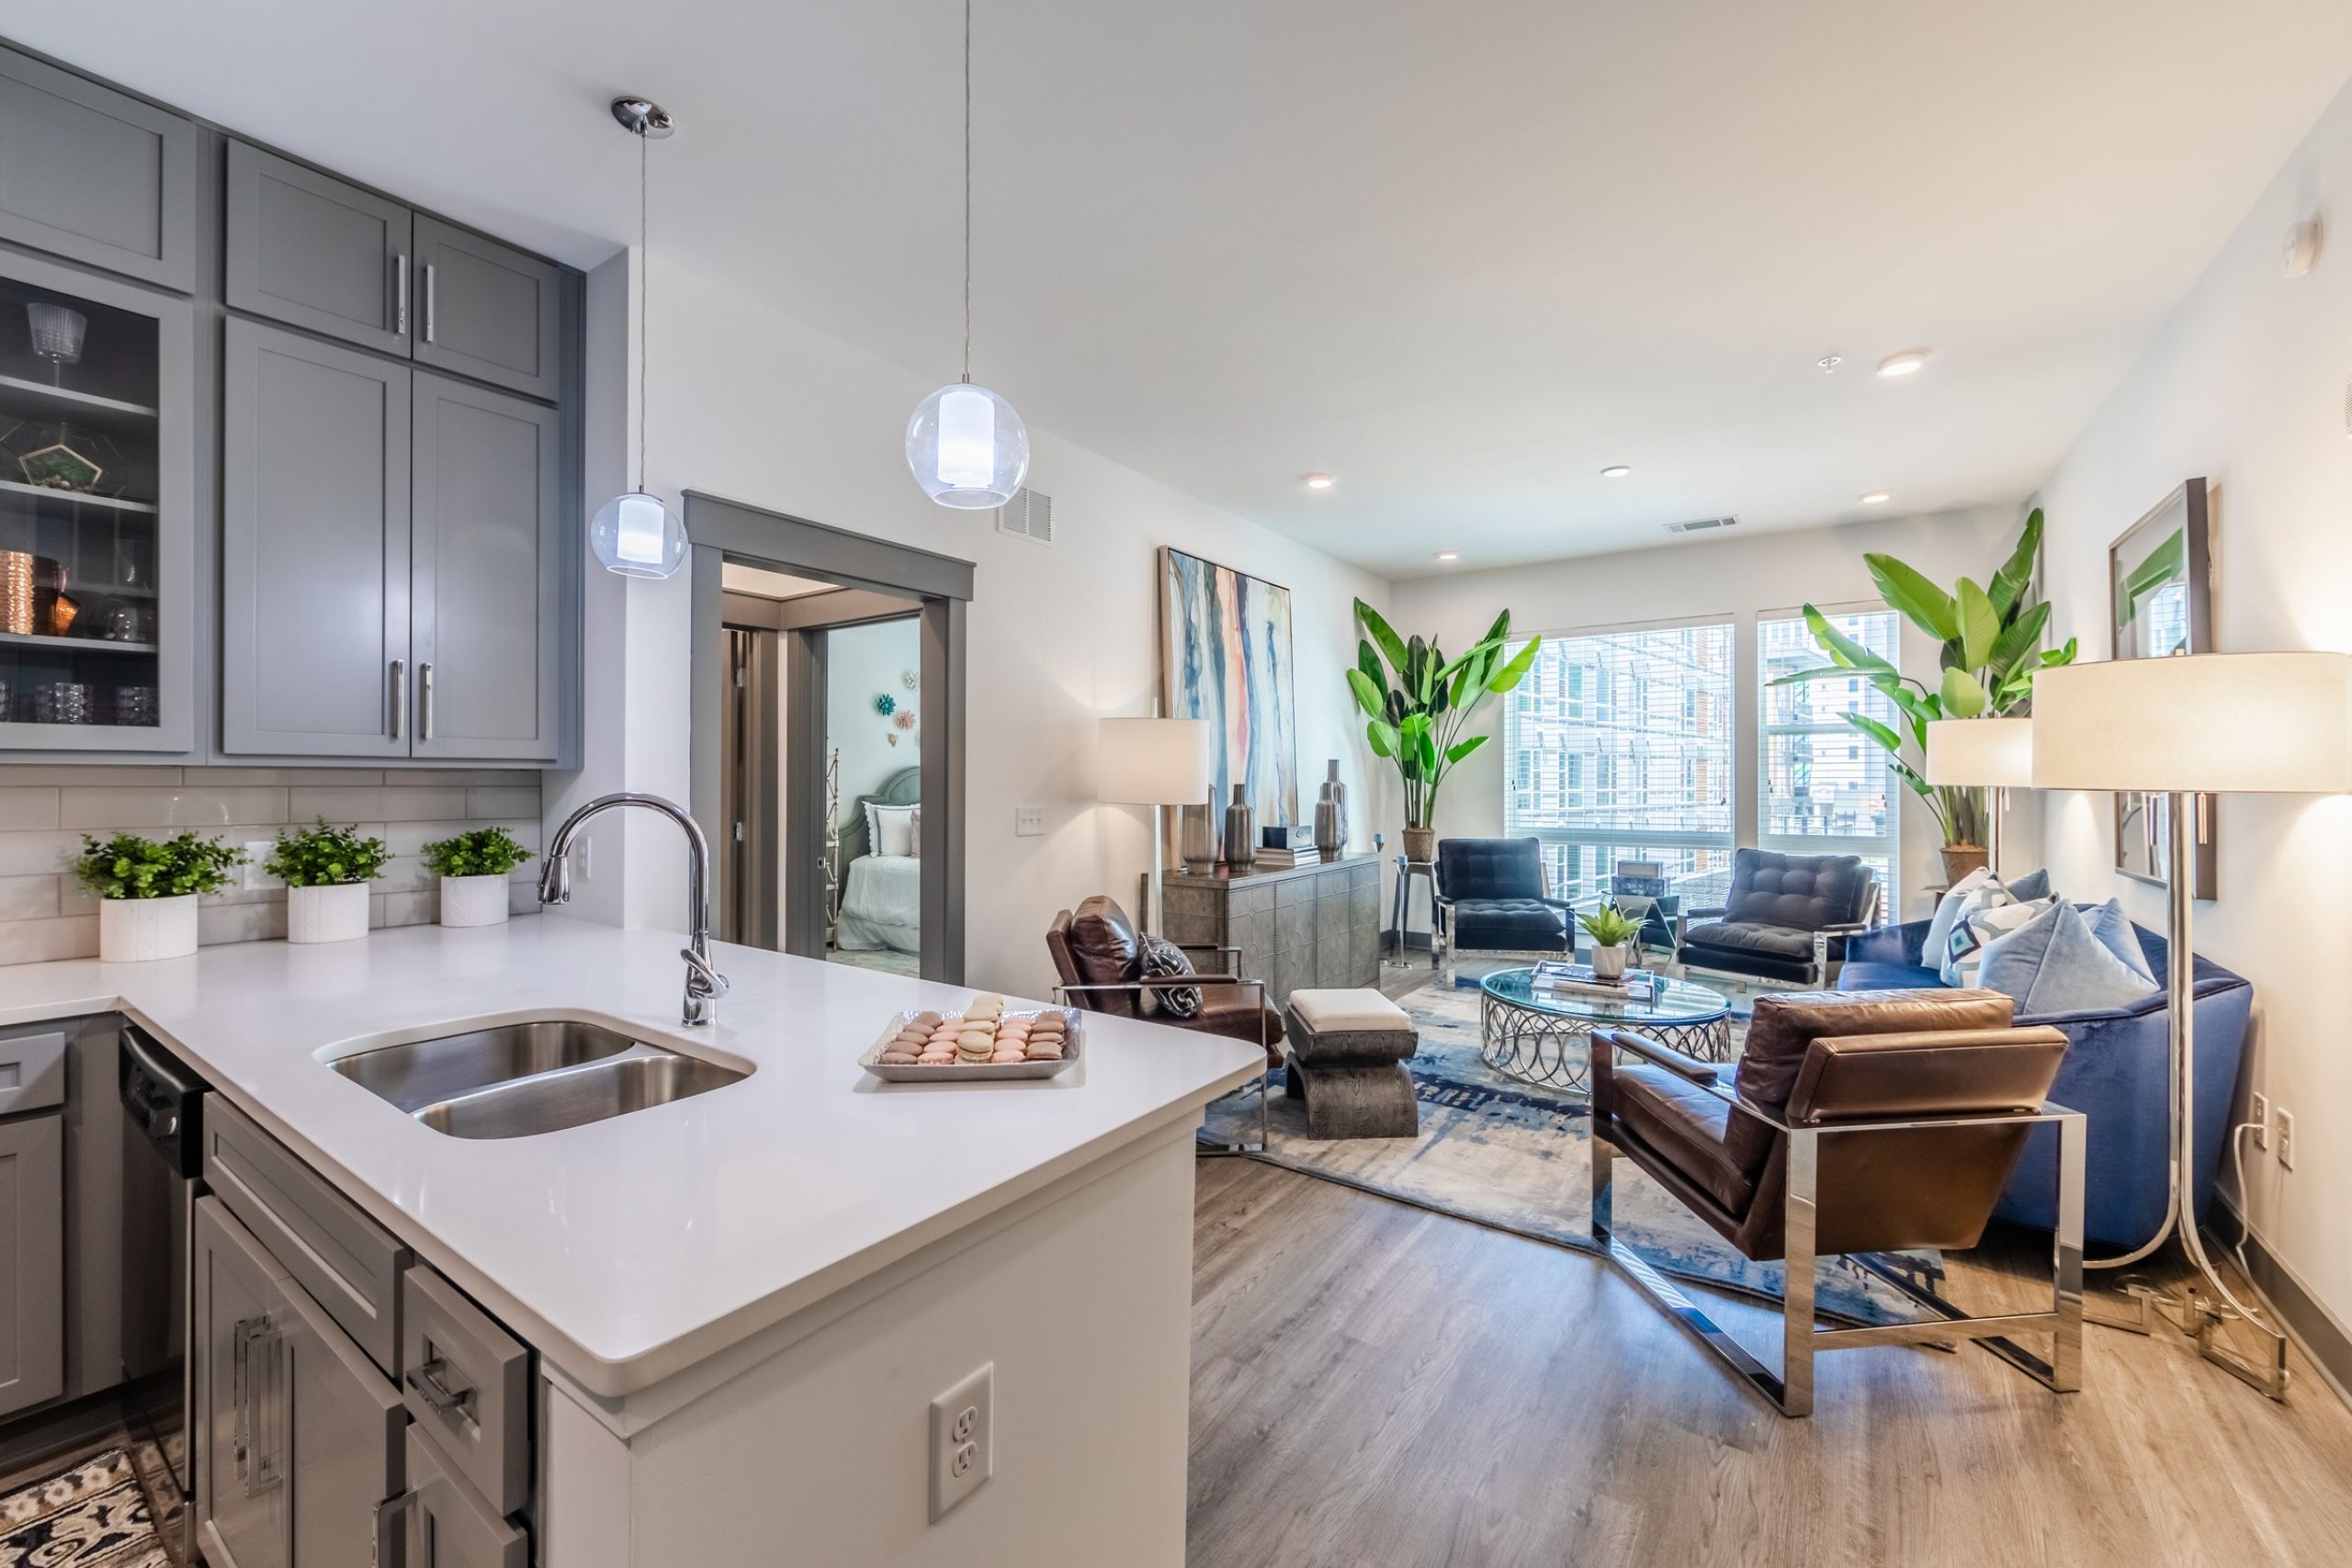 Uptown 550 spacious apartment interior with kitchen island and open floor plan